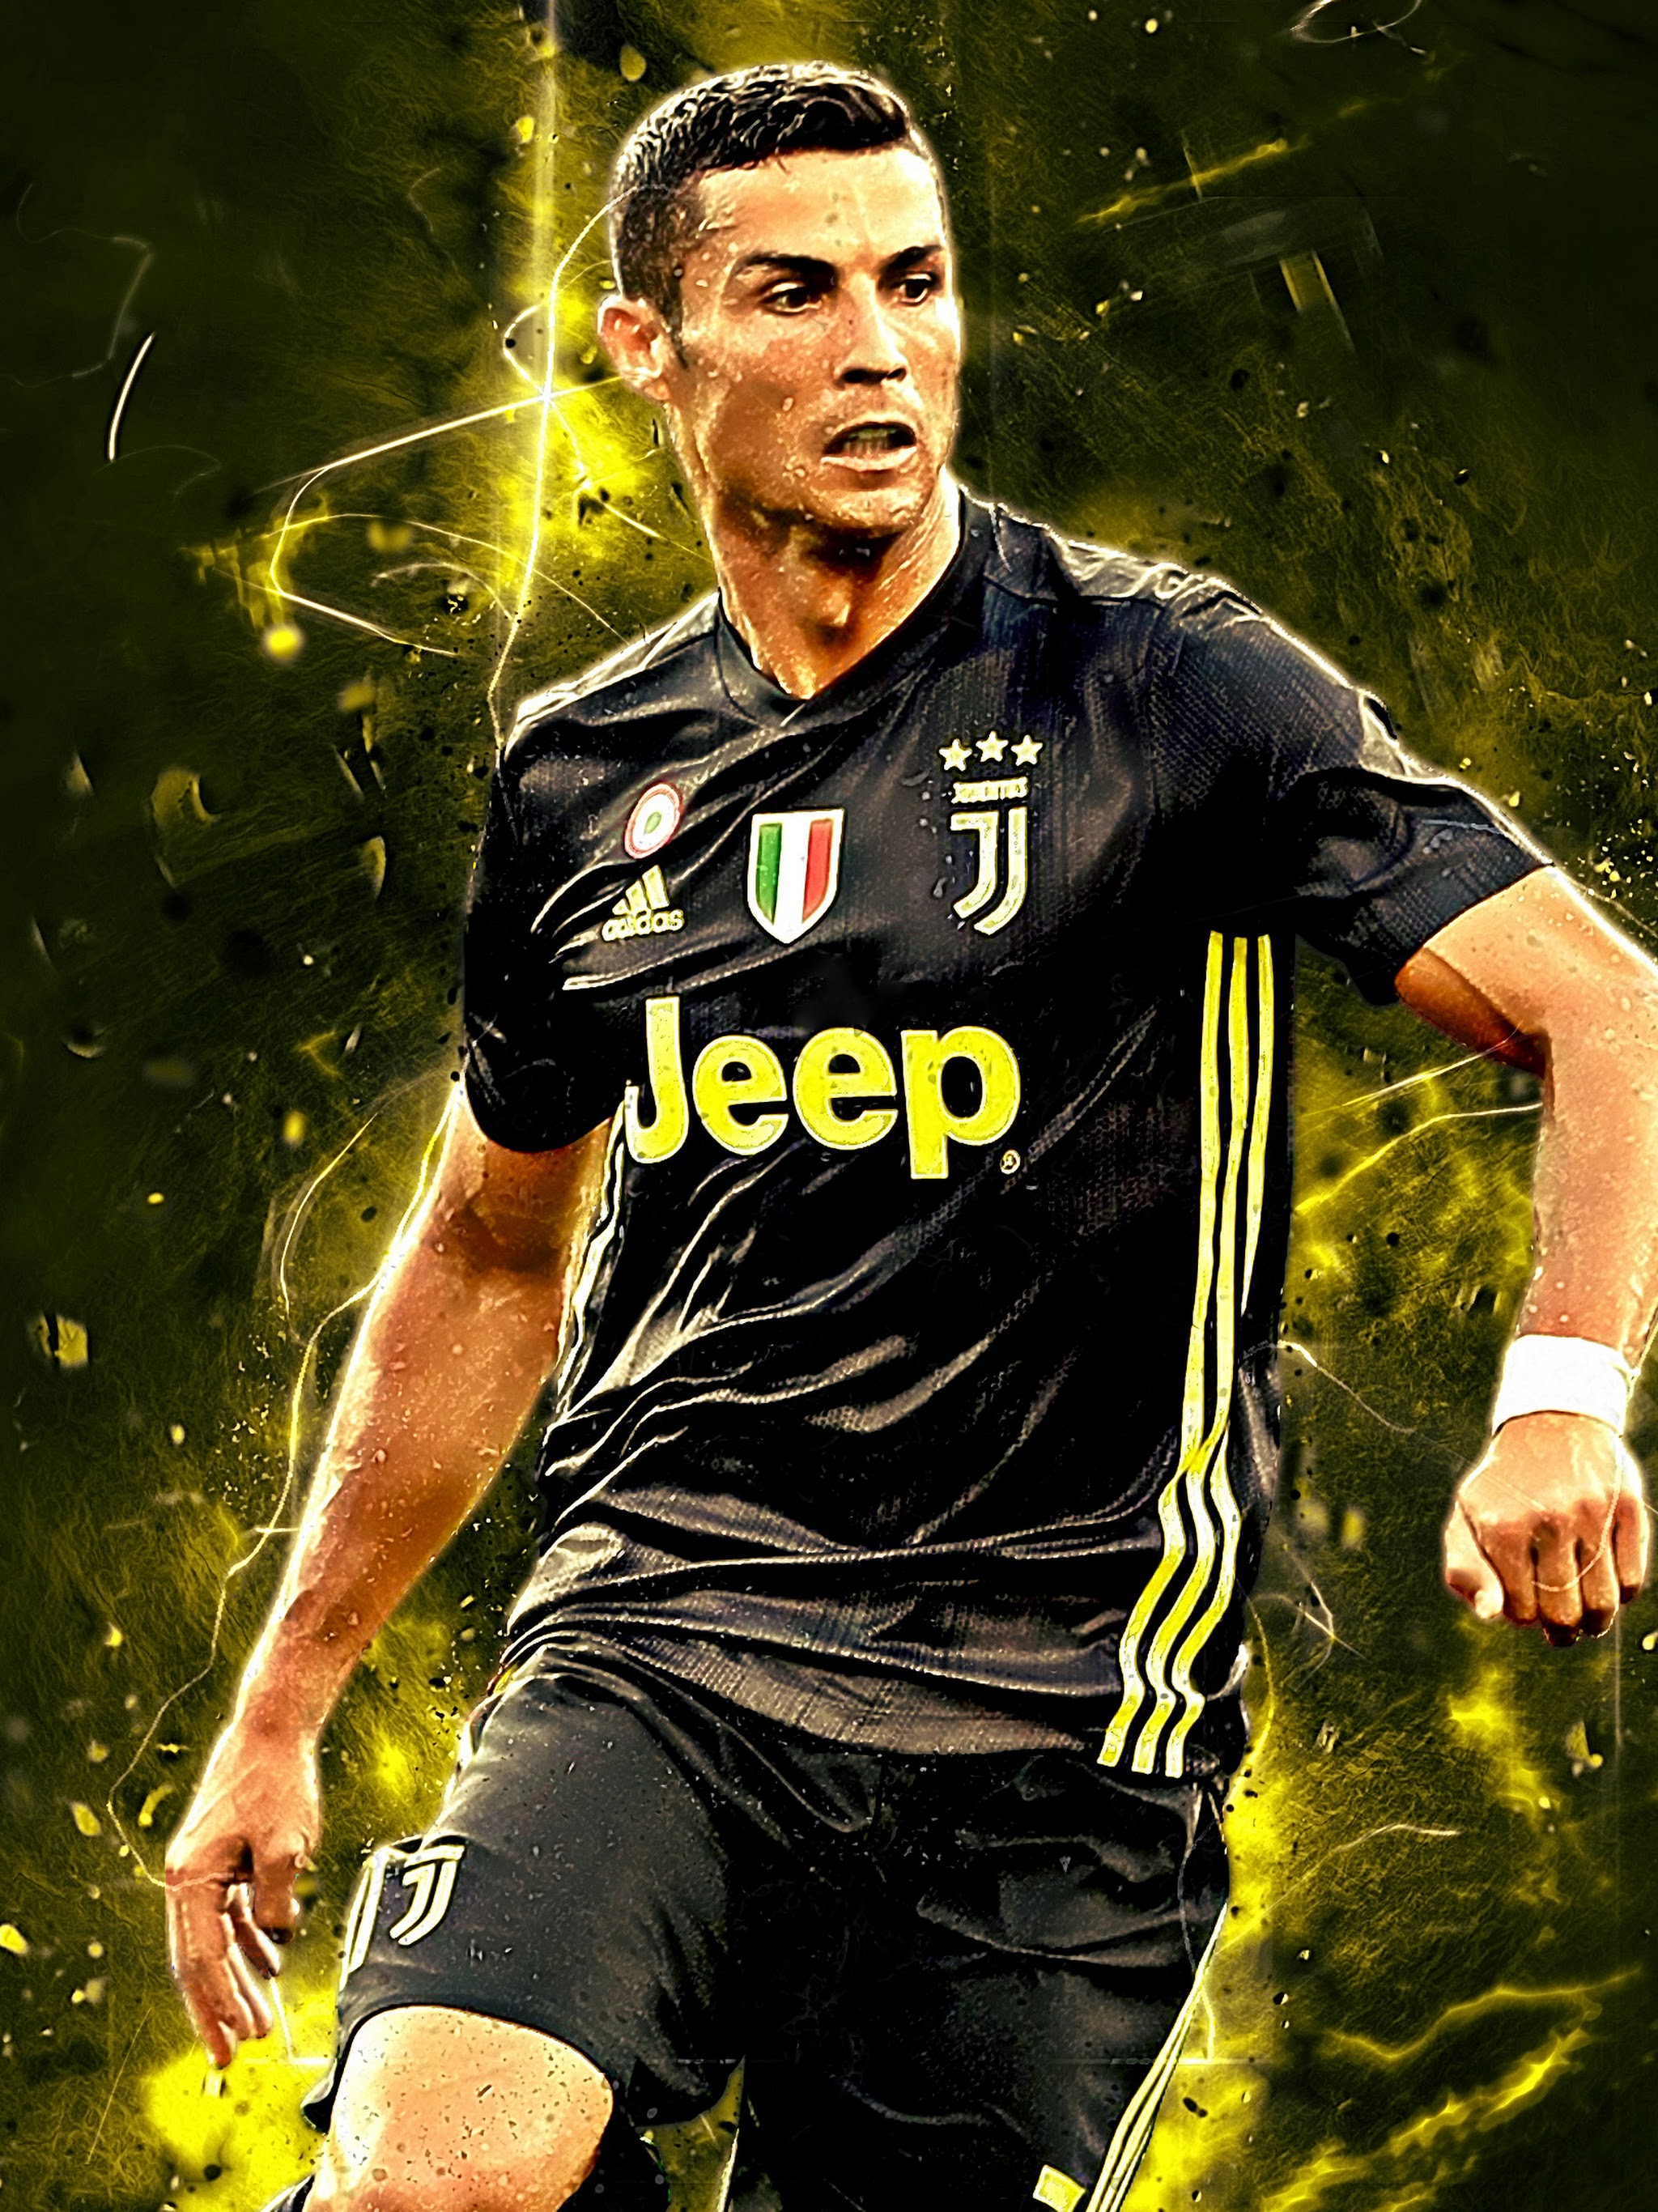 CR7 Ronaldo Wallpaper 4K for Android - Download